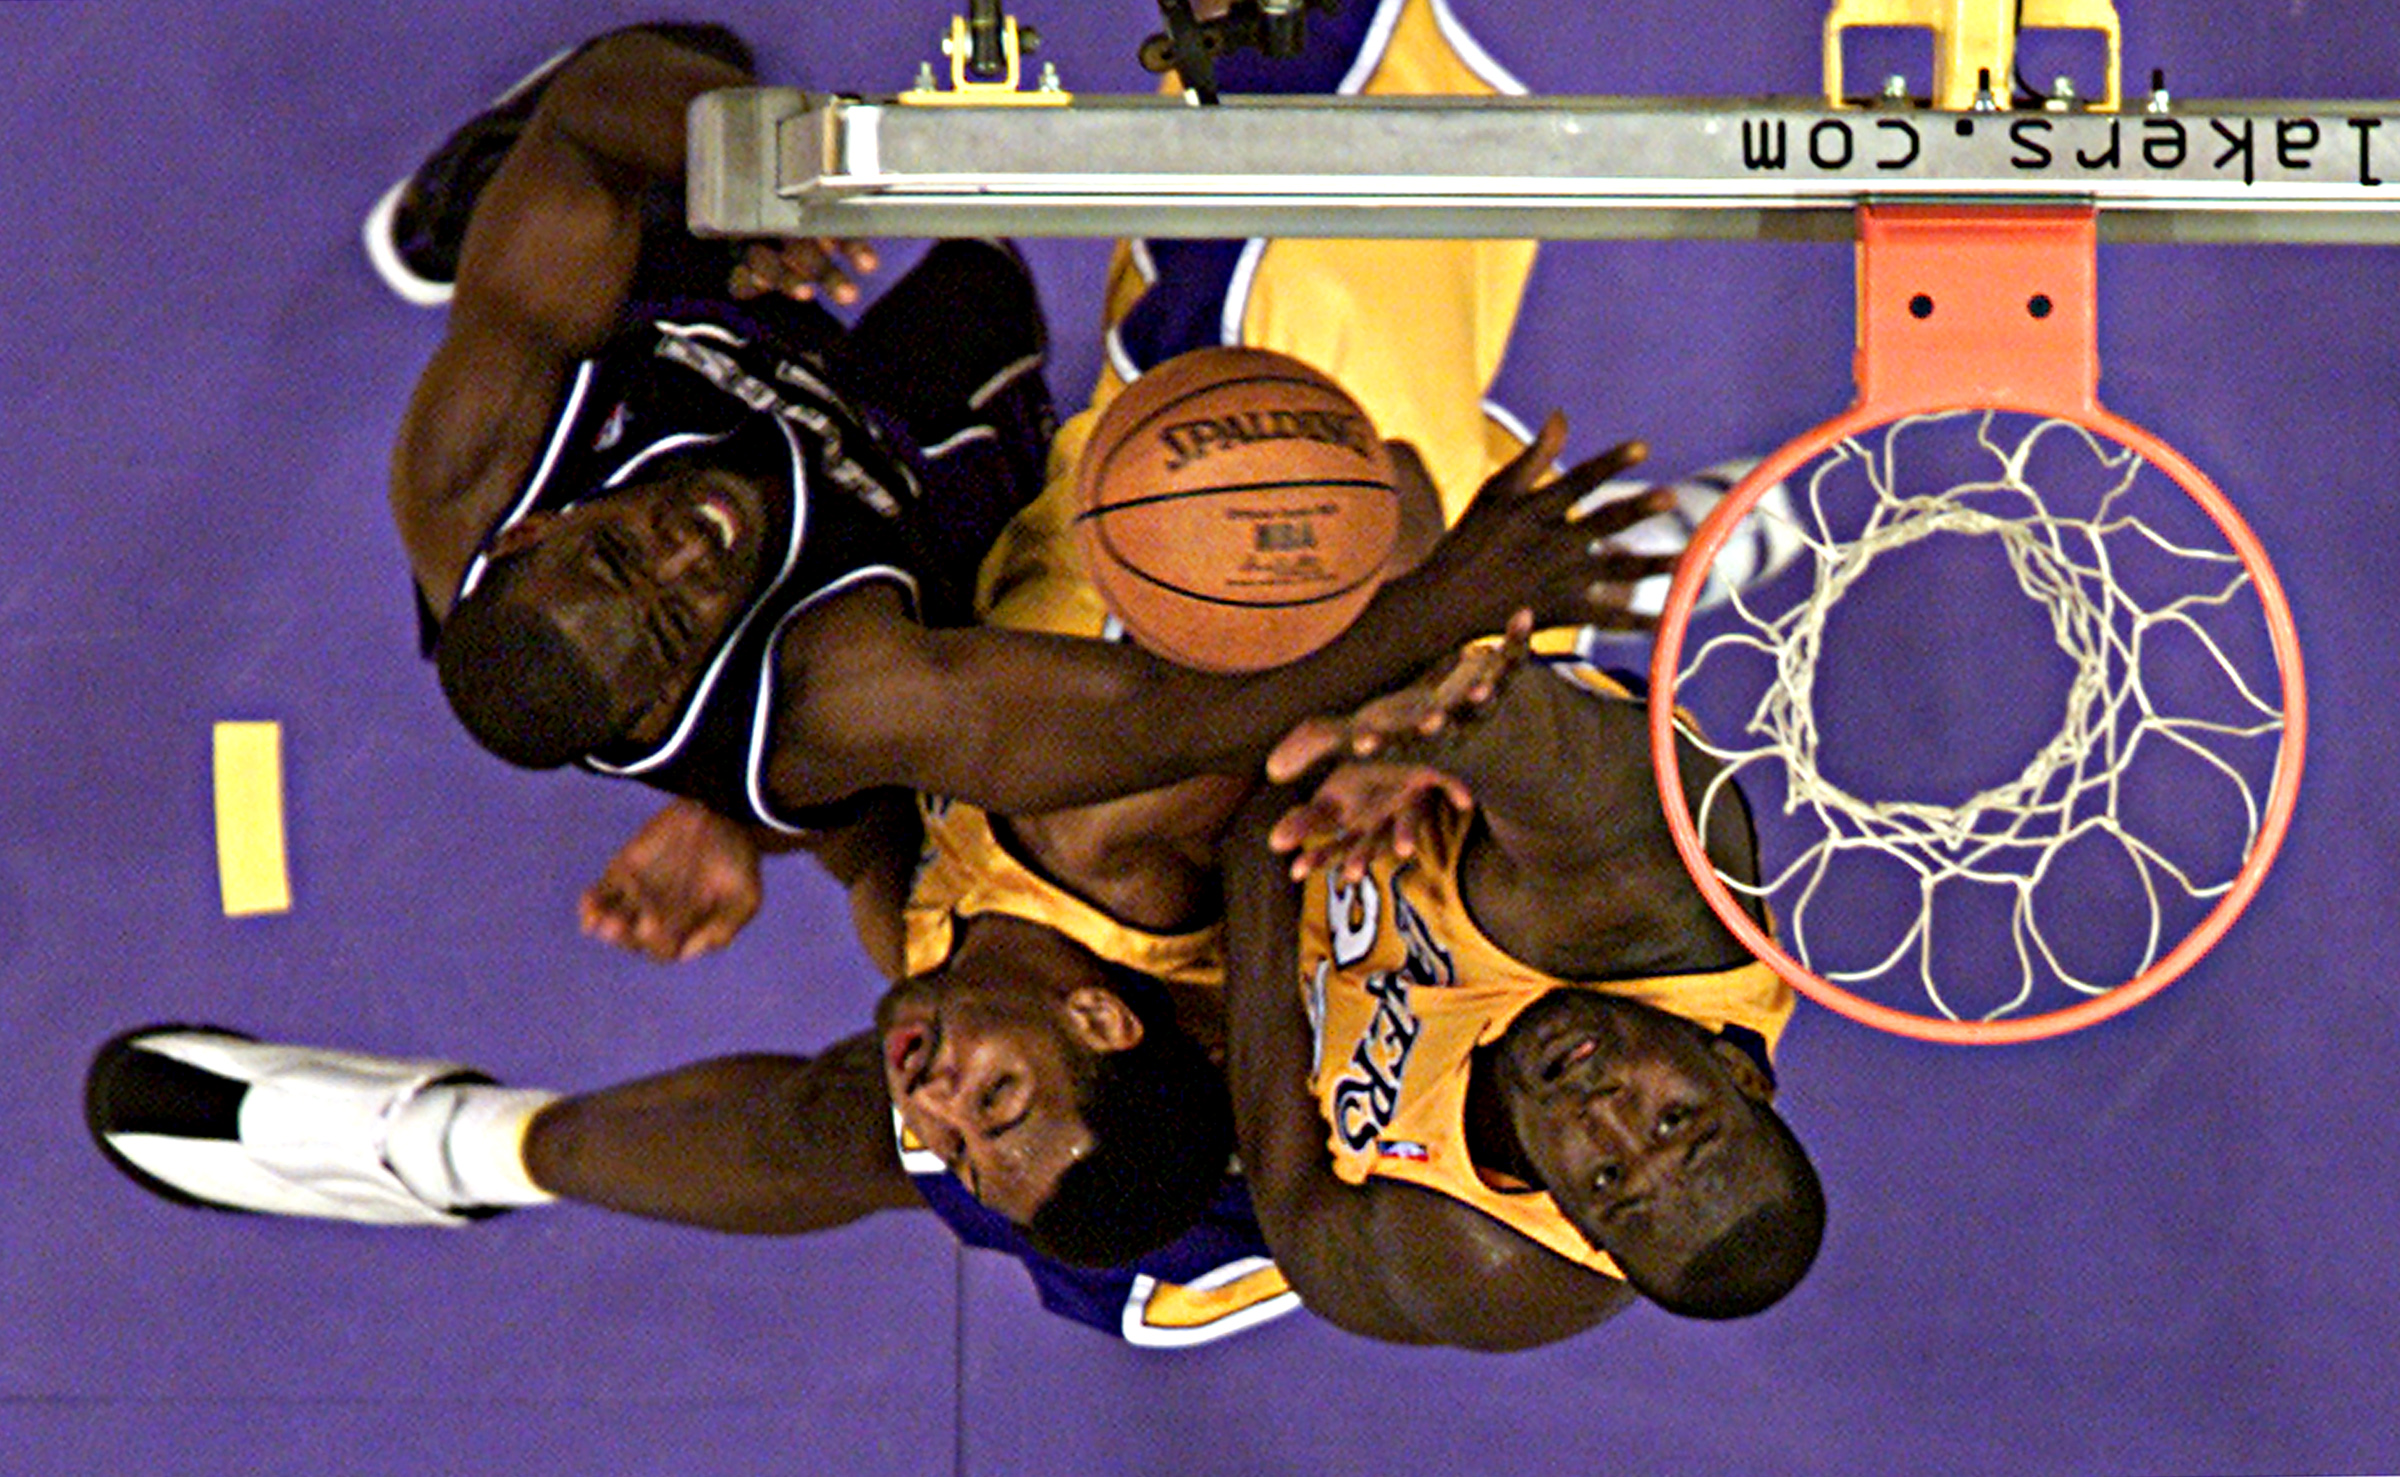 Lakers center Shaquille O'Neal and Kings forward Chris Webber battle for a rebound during the 2002 Western Conference Finals